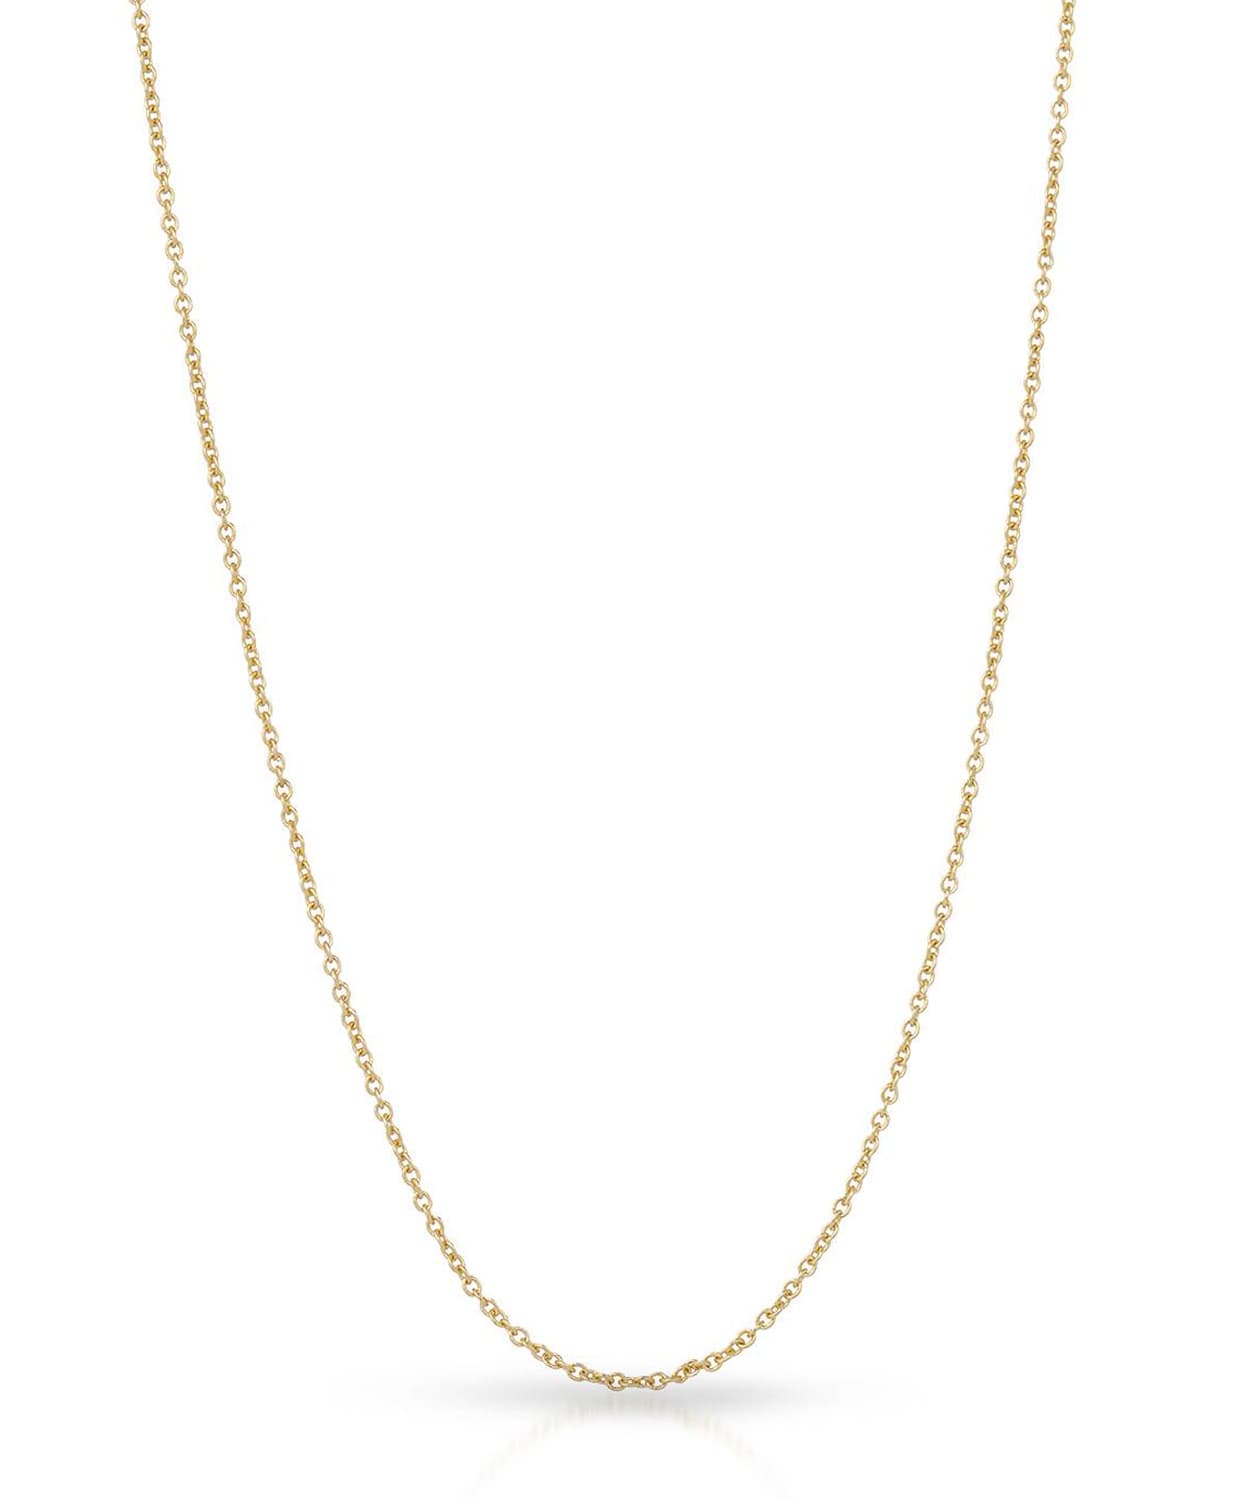 1.1mm 14k Yellow Gold Rolo Adjustable Chain View 1